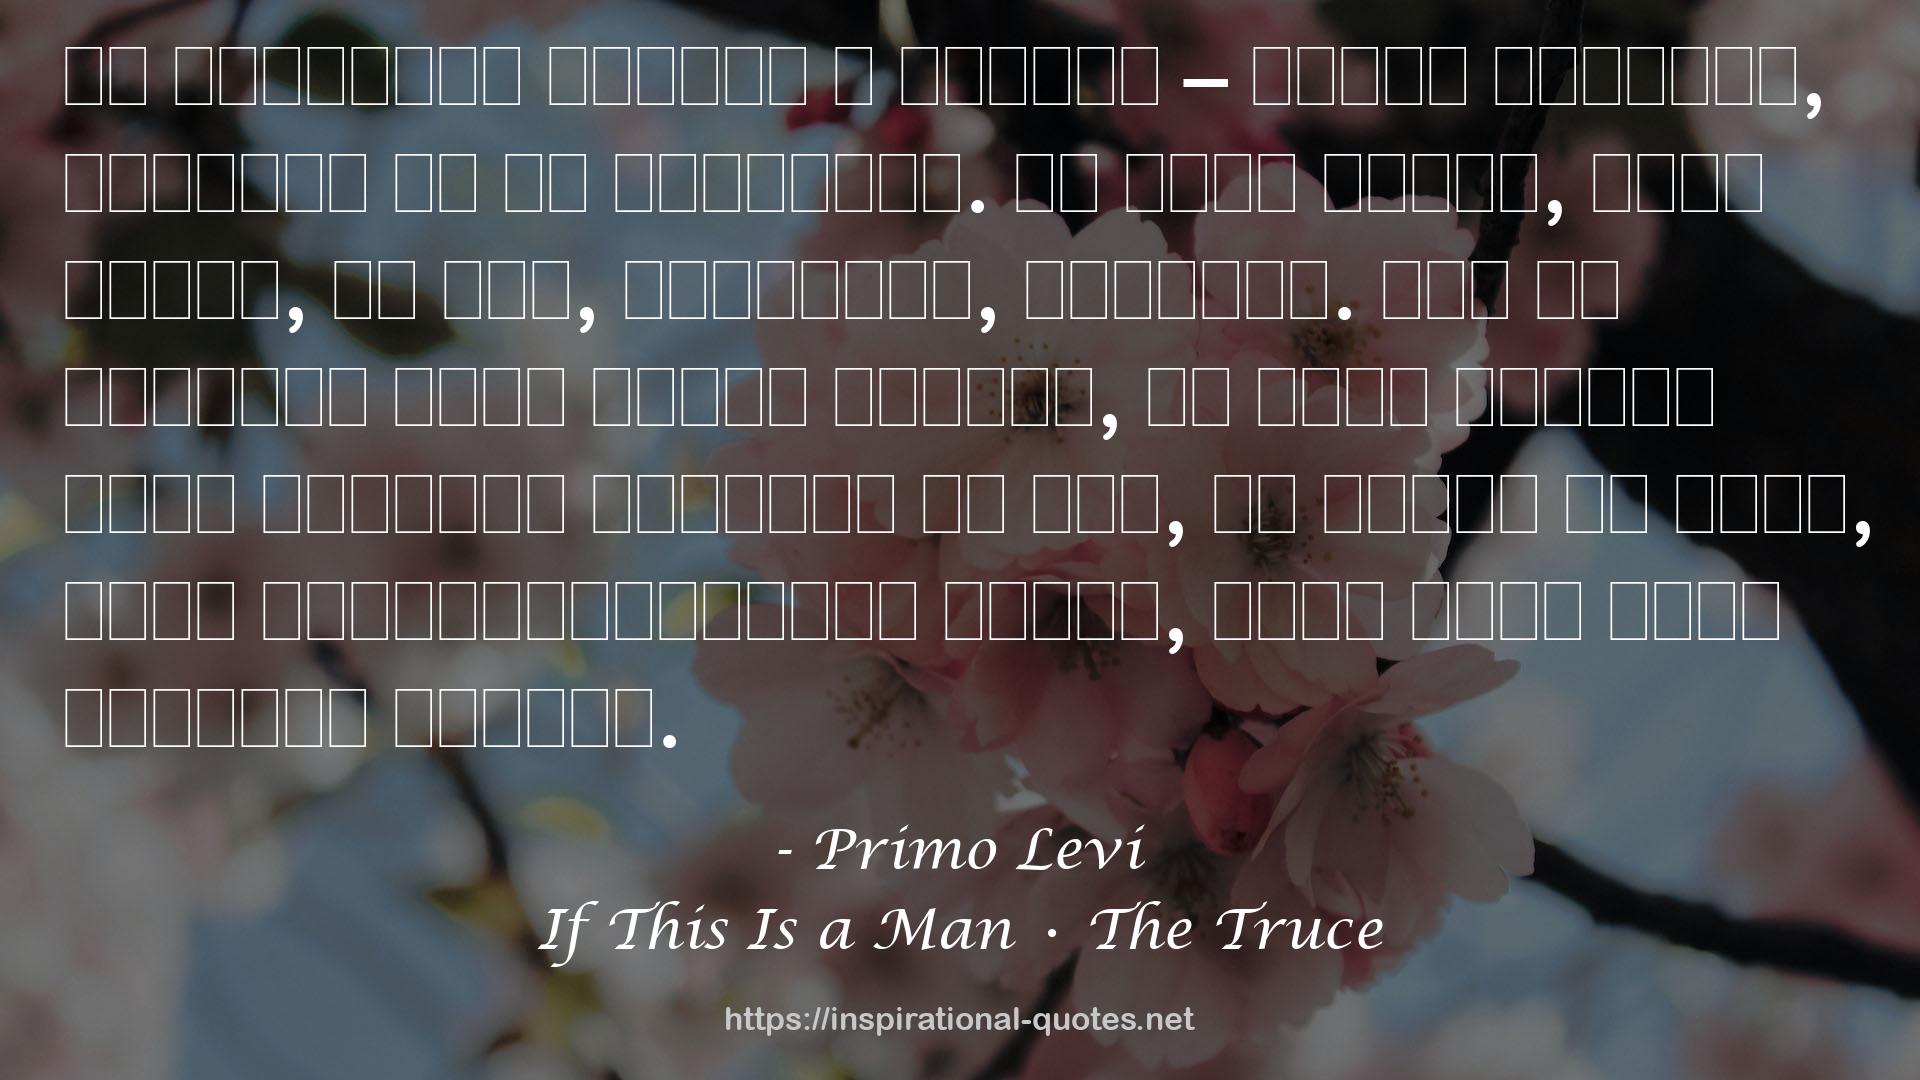 If This Is a Man • The Truce QUOTES